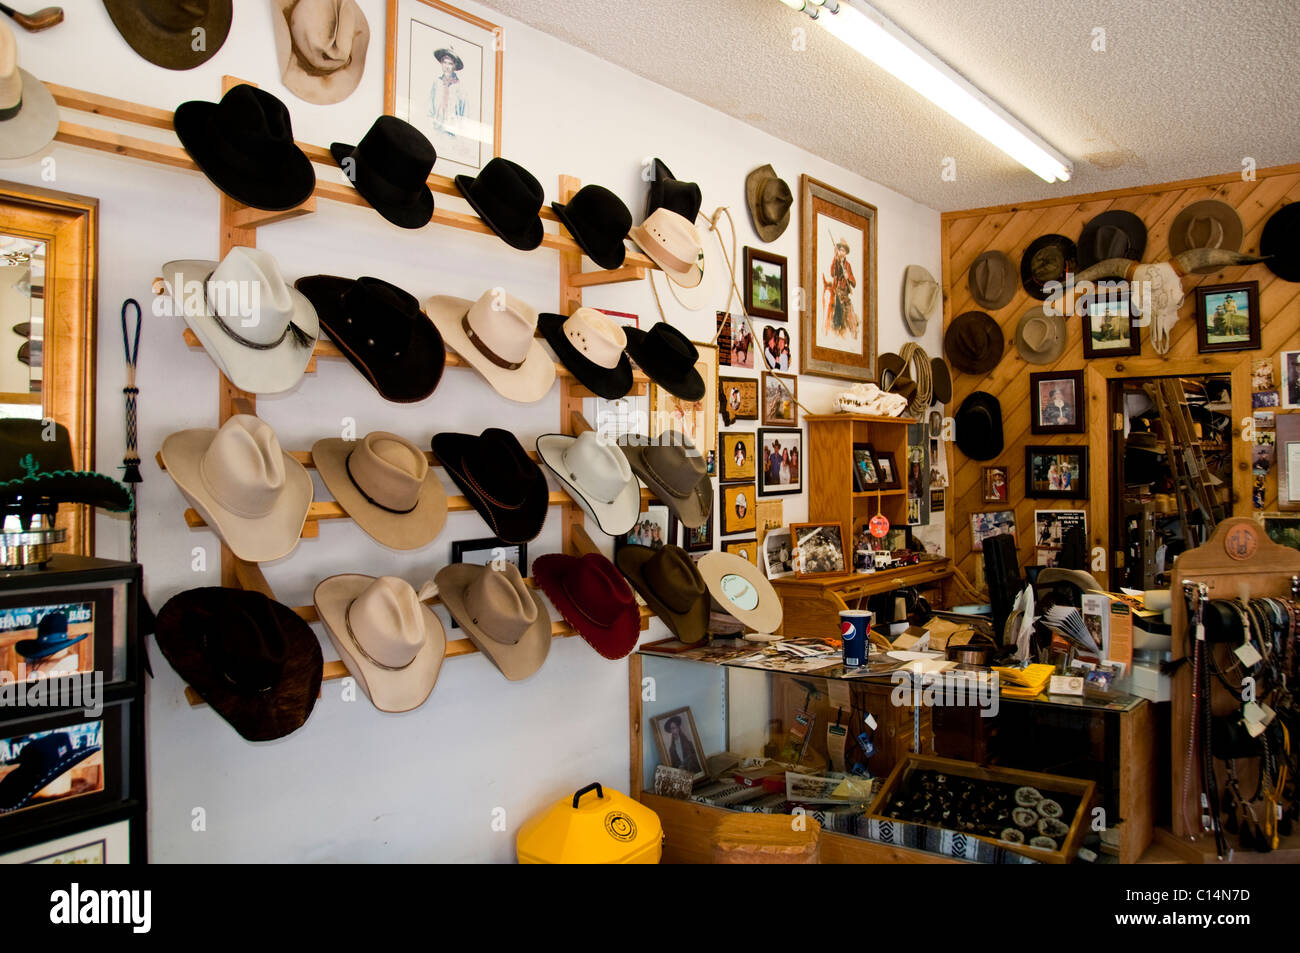 Antiques Market,Cowboy Hat Shop,Styles,Leathers,Felt,Darby,Highway 93, Montana, USA Stock Photo